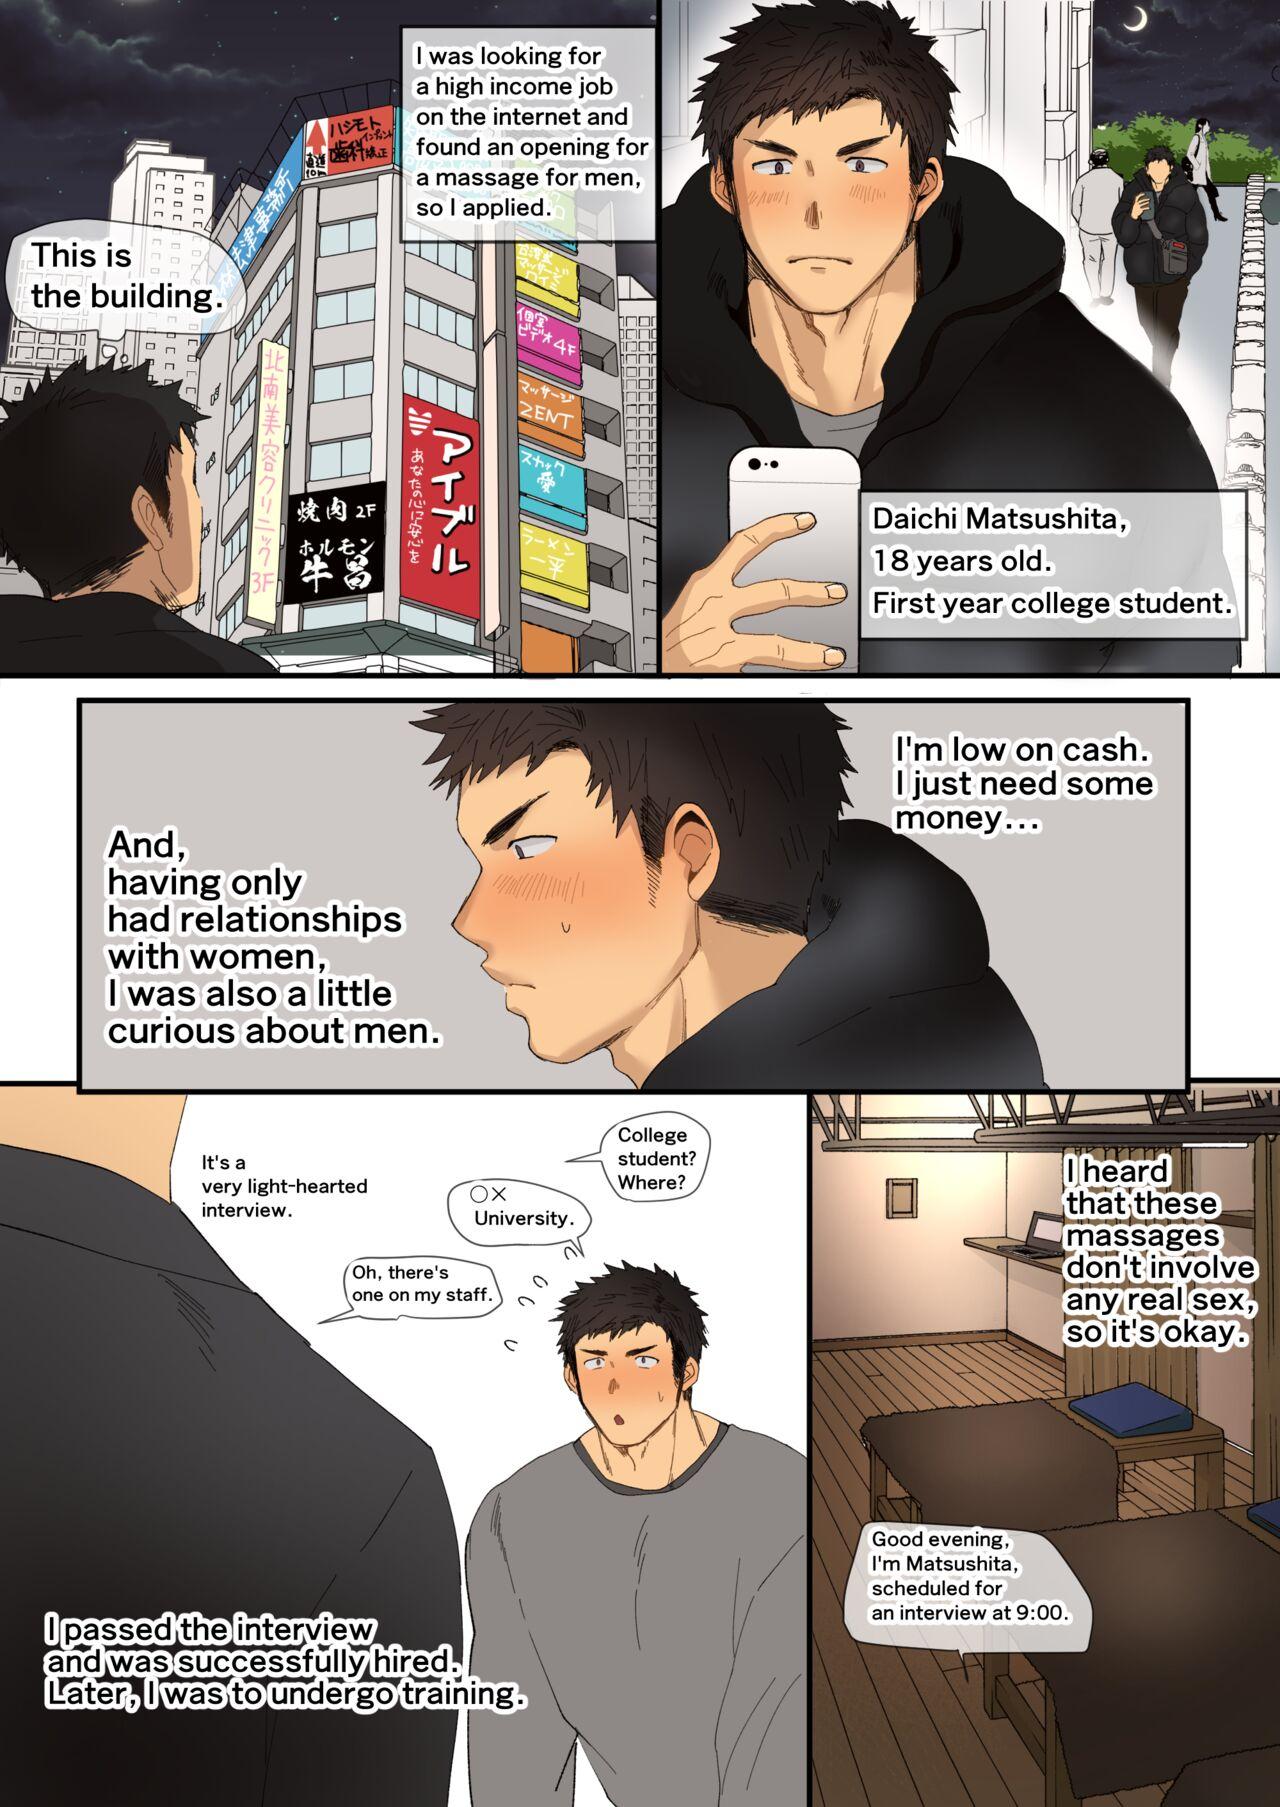 Cheat A manga about an athletic college student who receives sexually explicit massage training from an older manager - Original Brother - Page 1